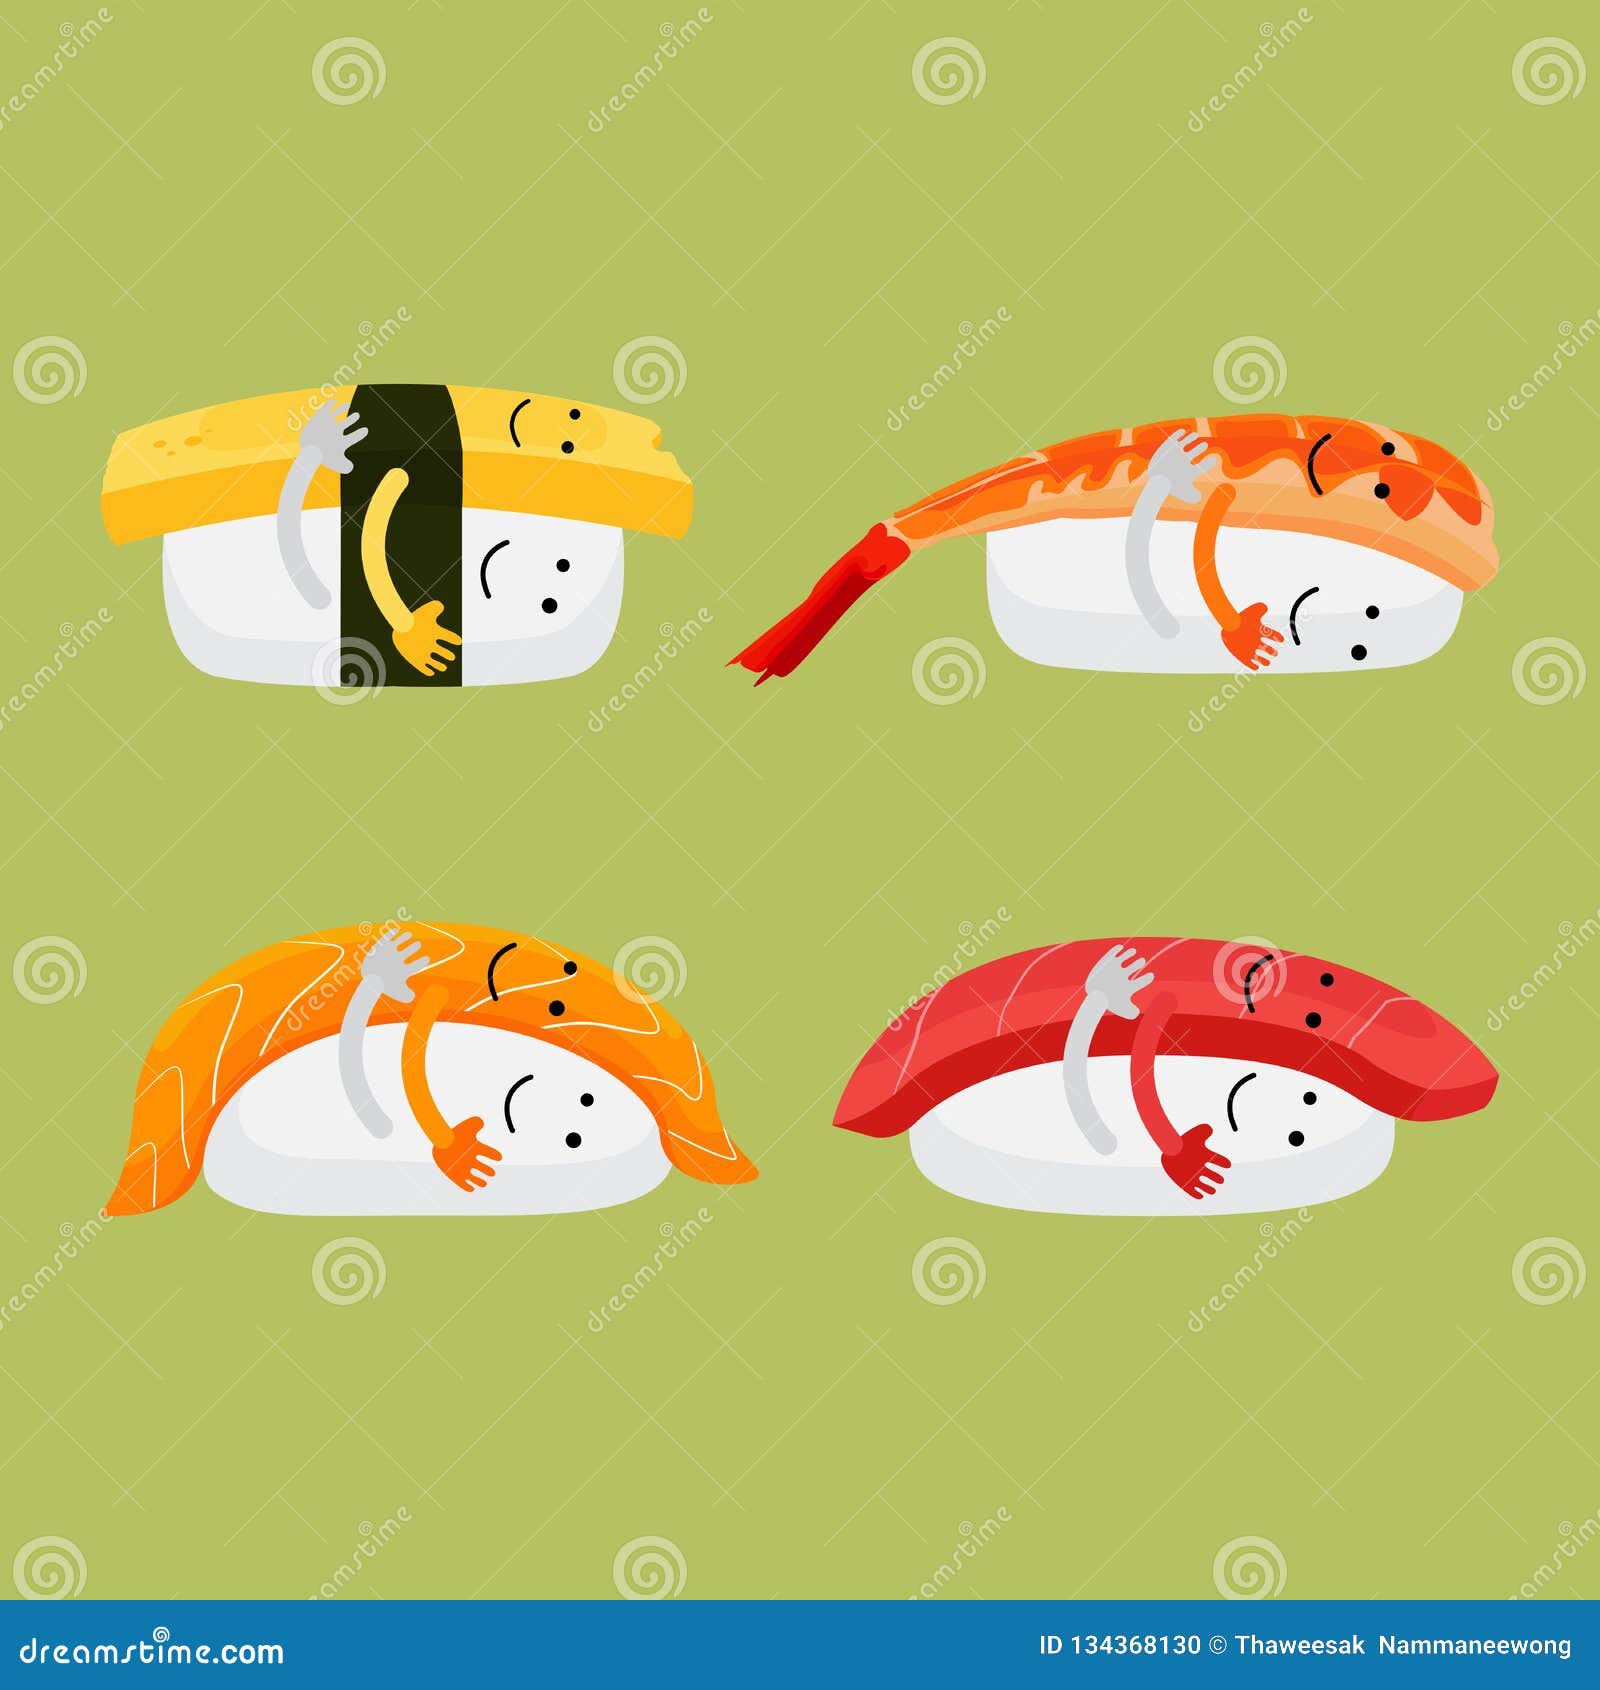 Sushi is my Valentine funny saying with cute sushi illustration